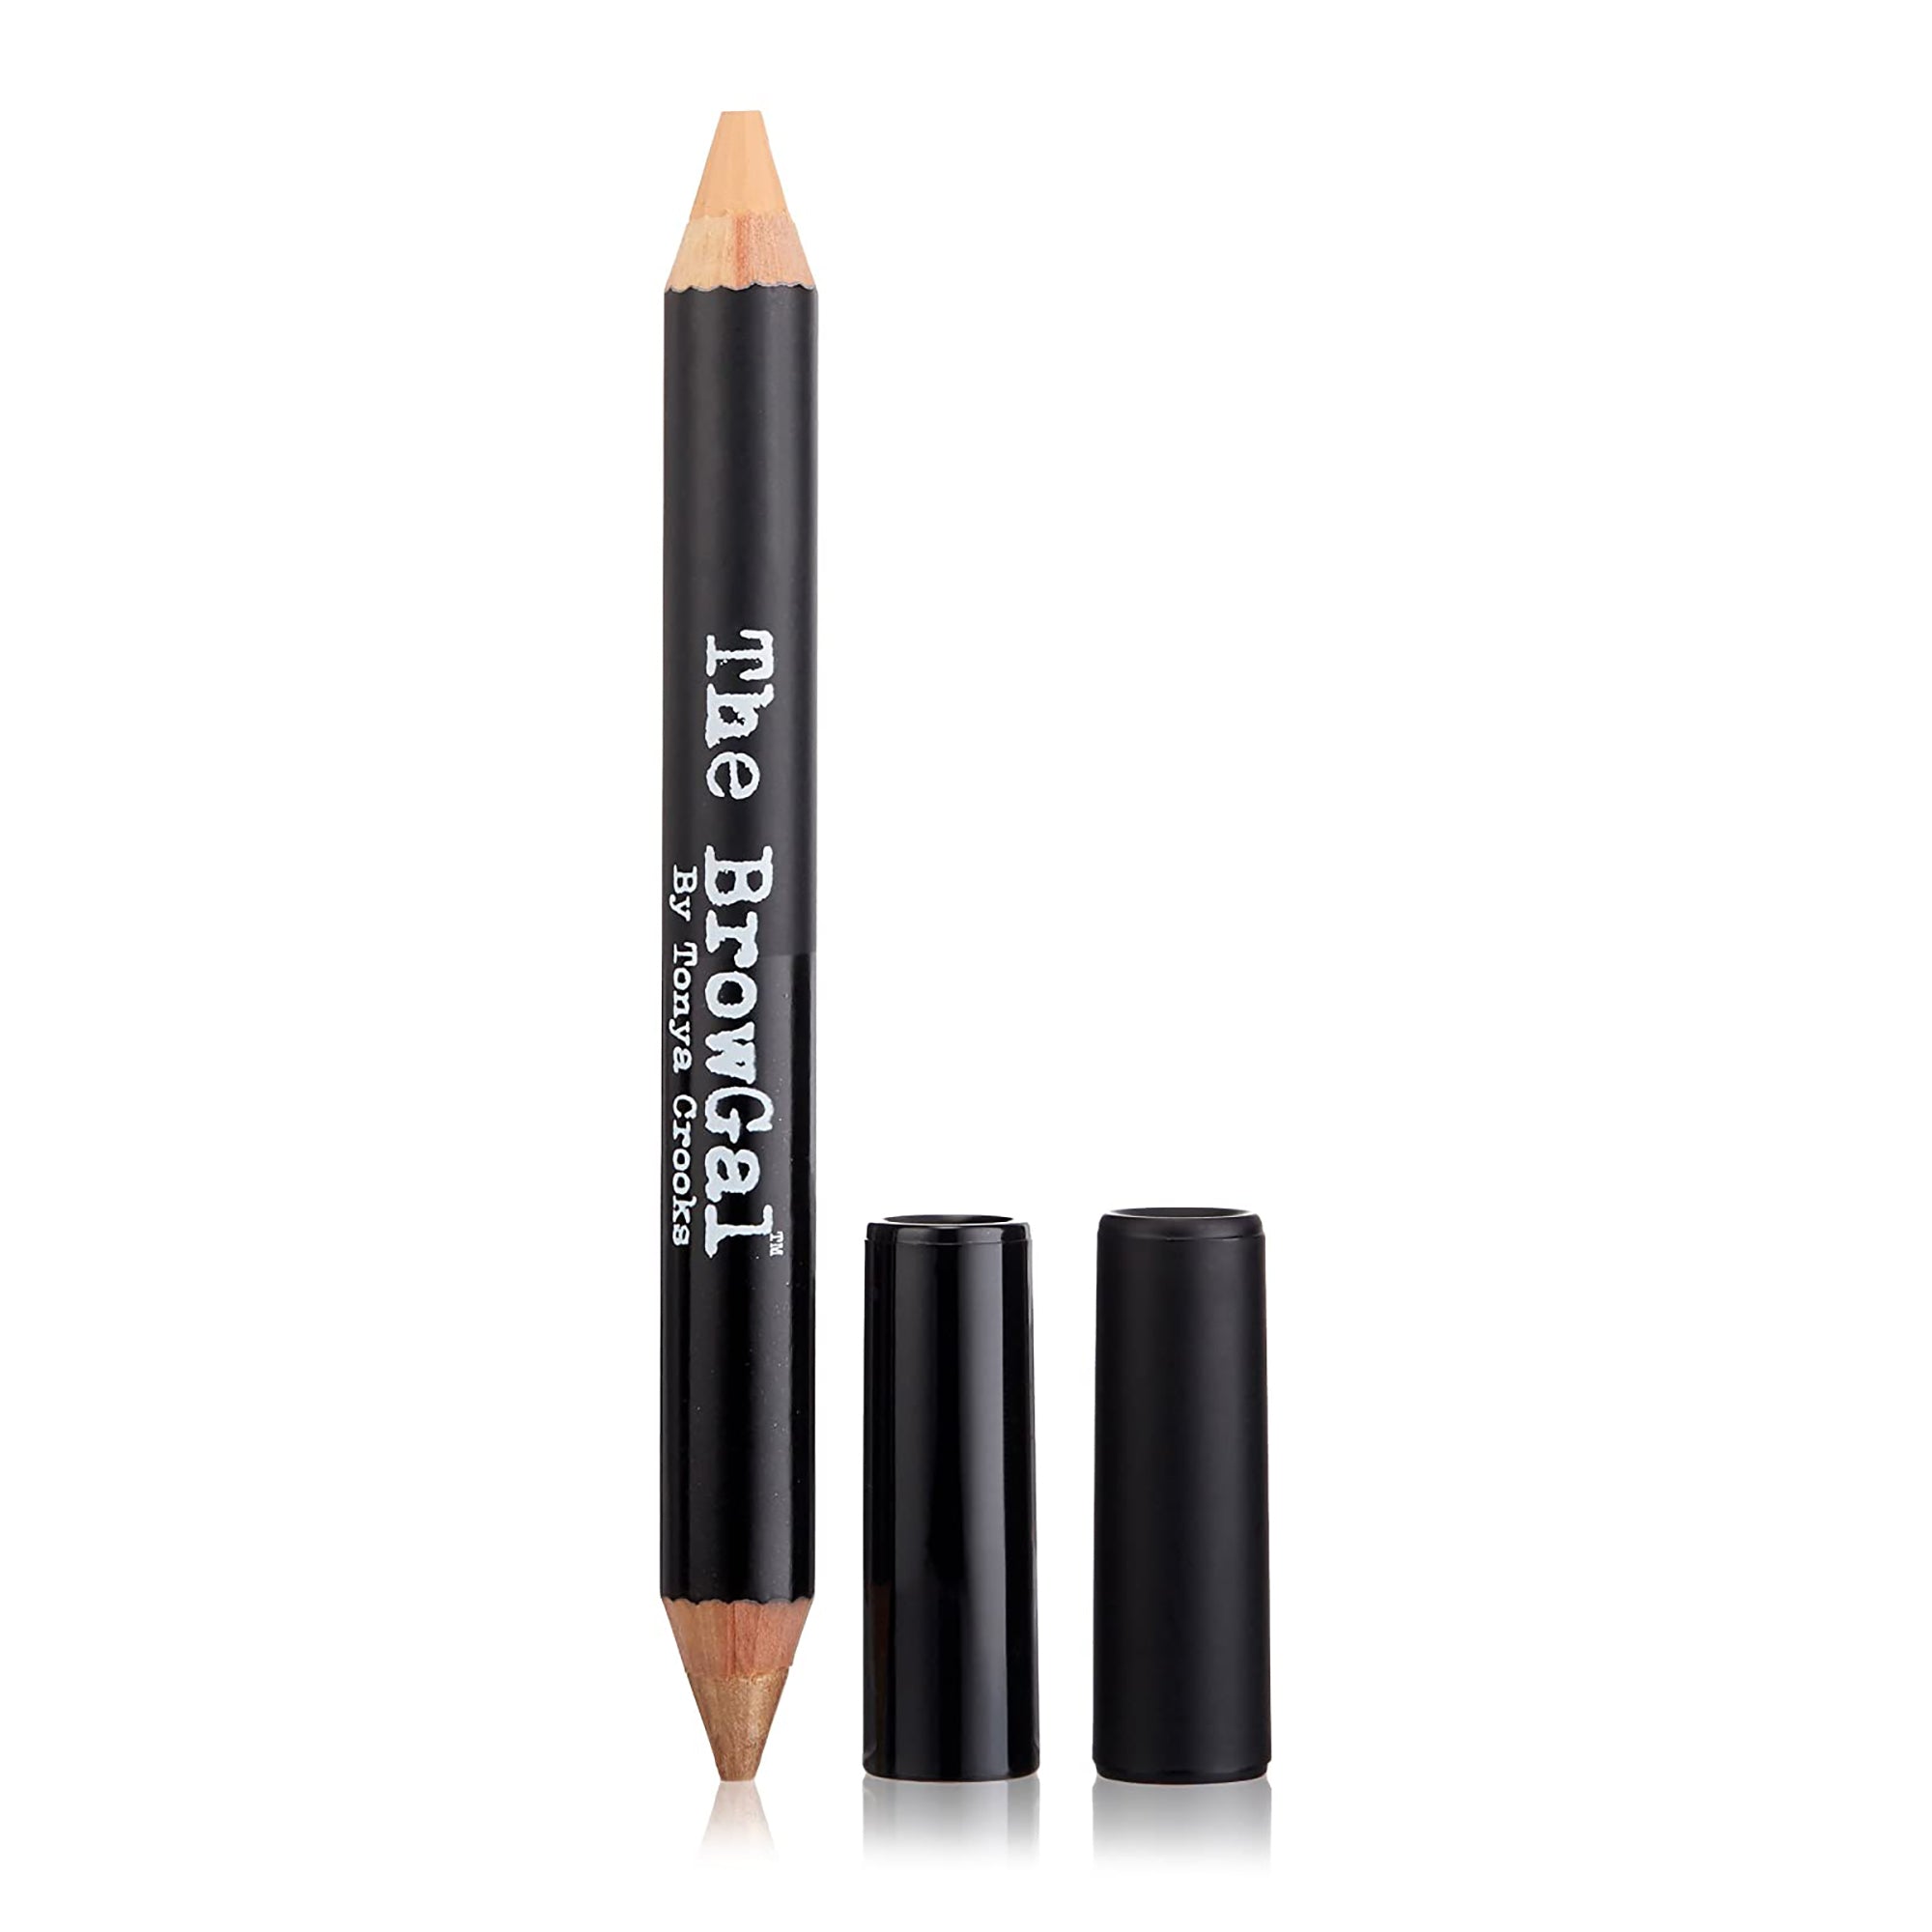 The BrowGal Highlighter Pencil -02 Gold/Nude